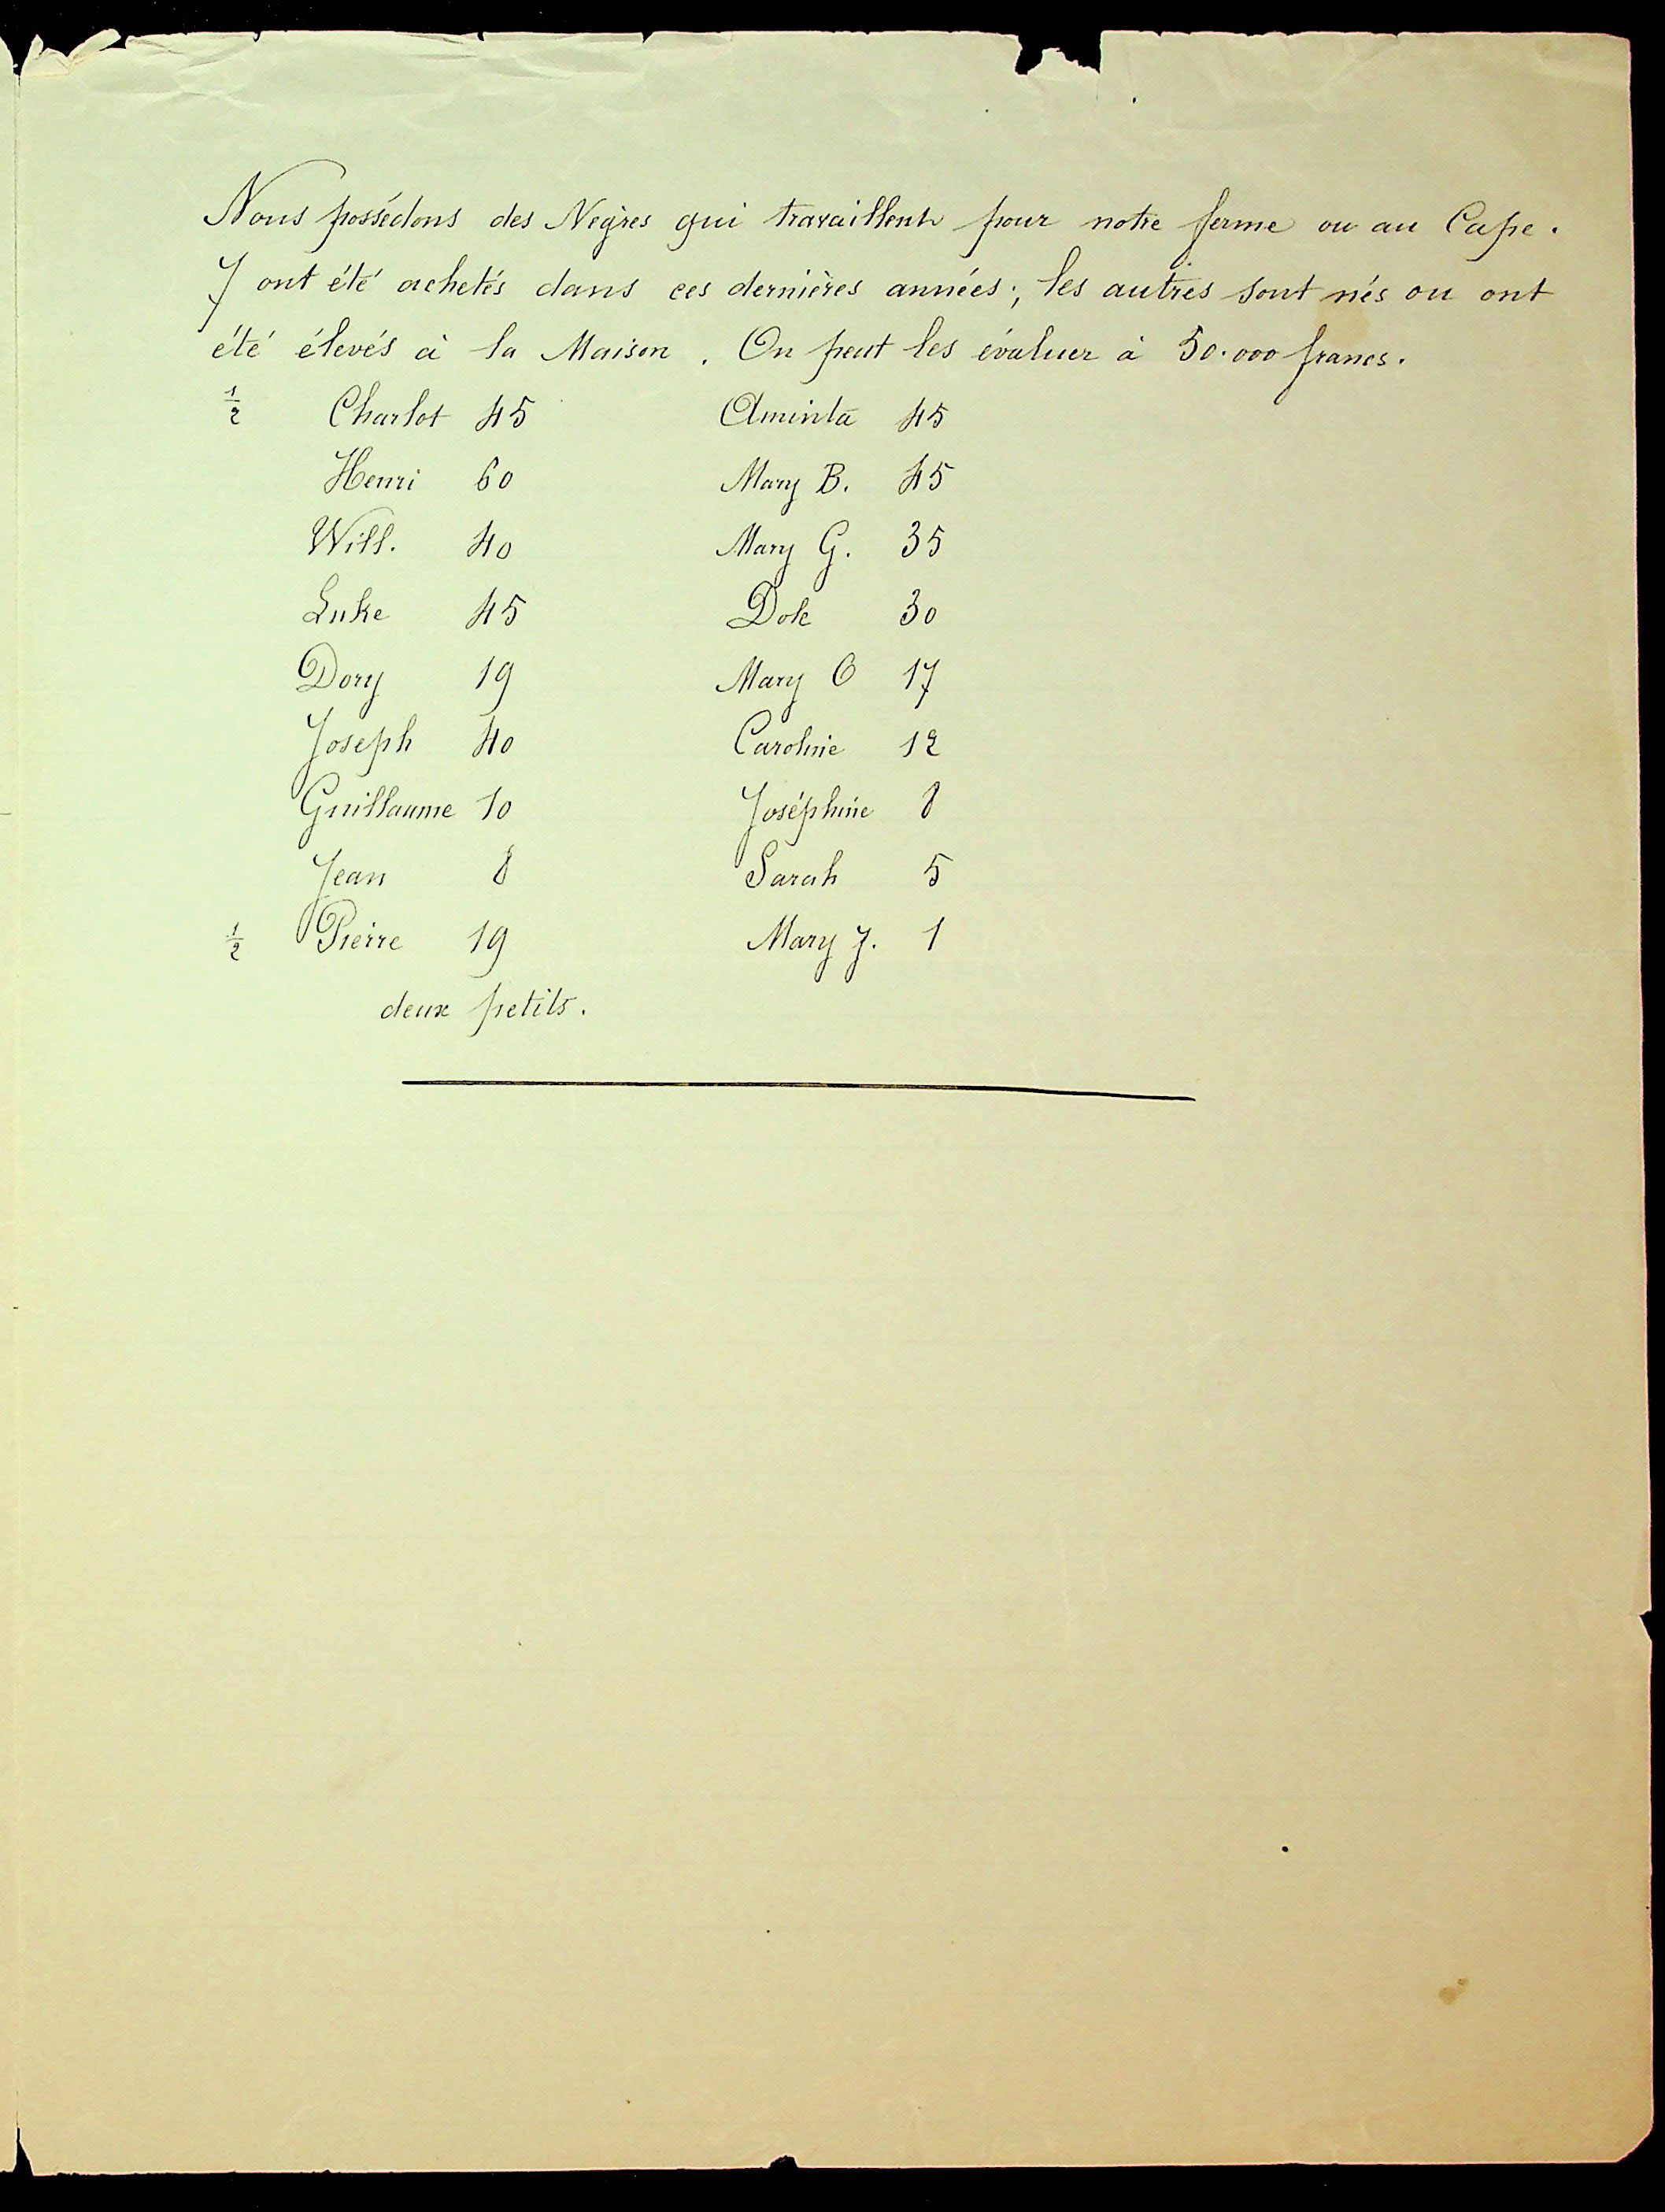 Timon List of Enslaved Persons, c1836